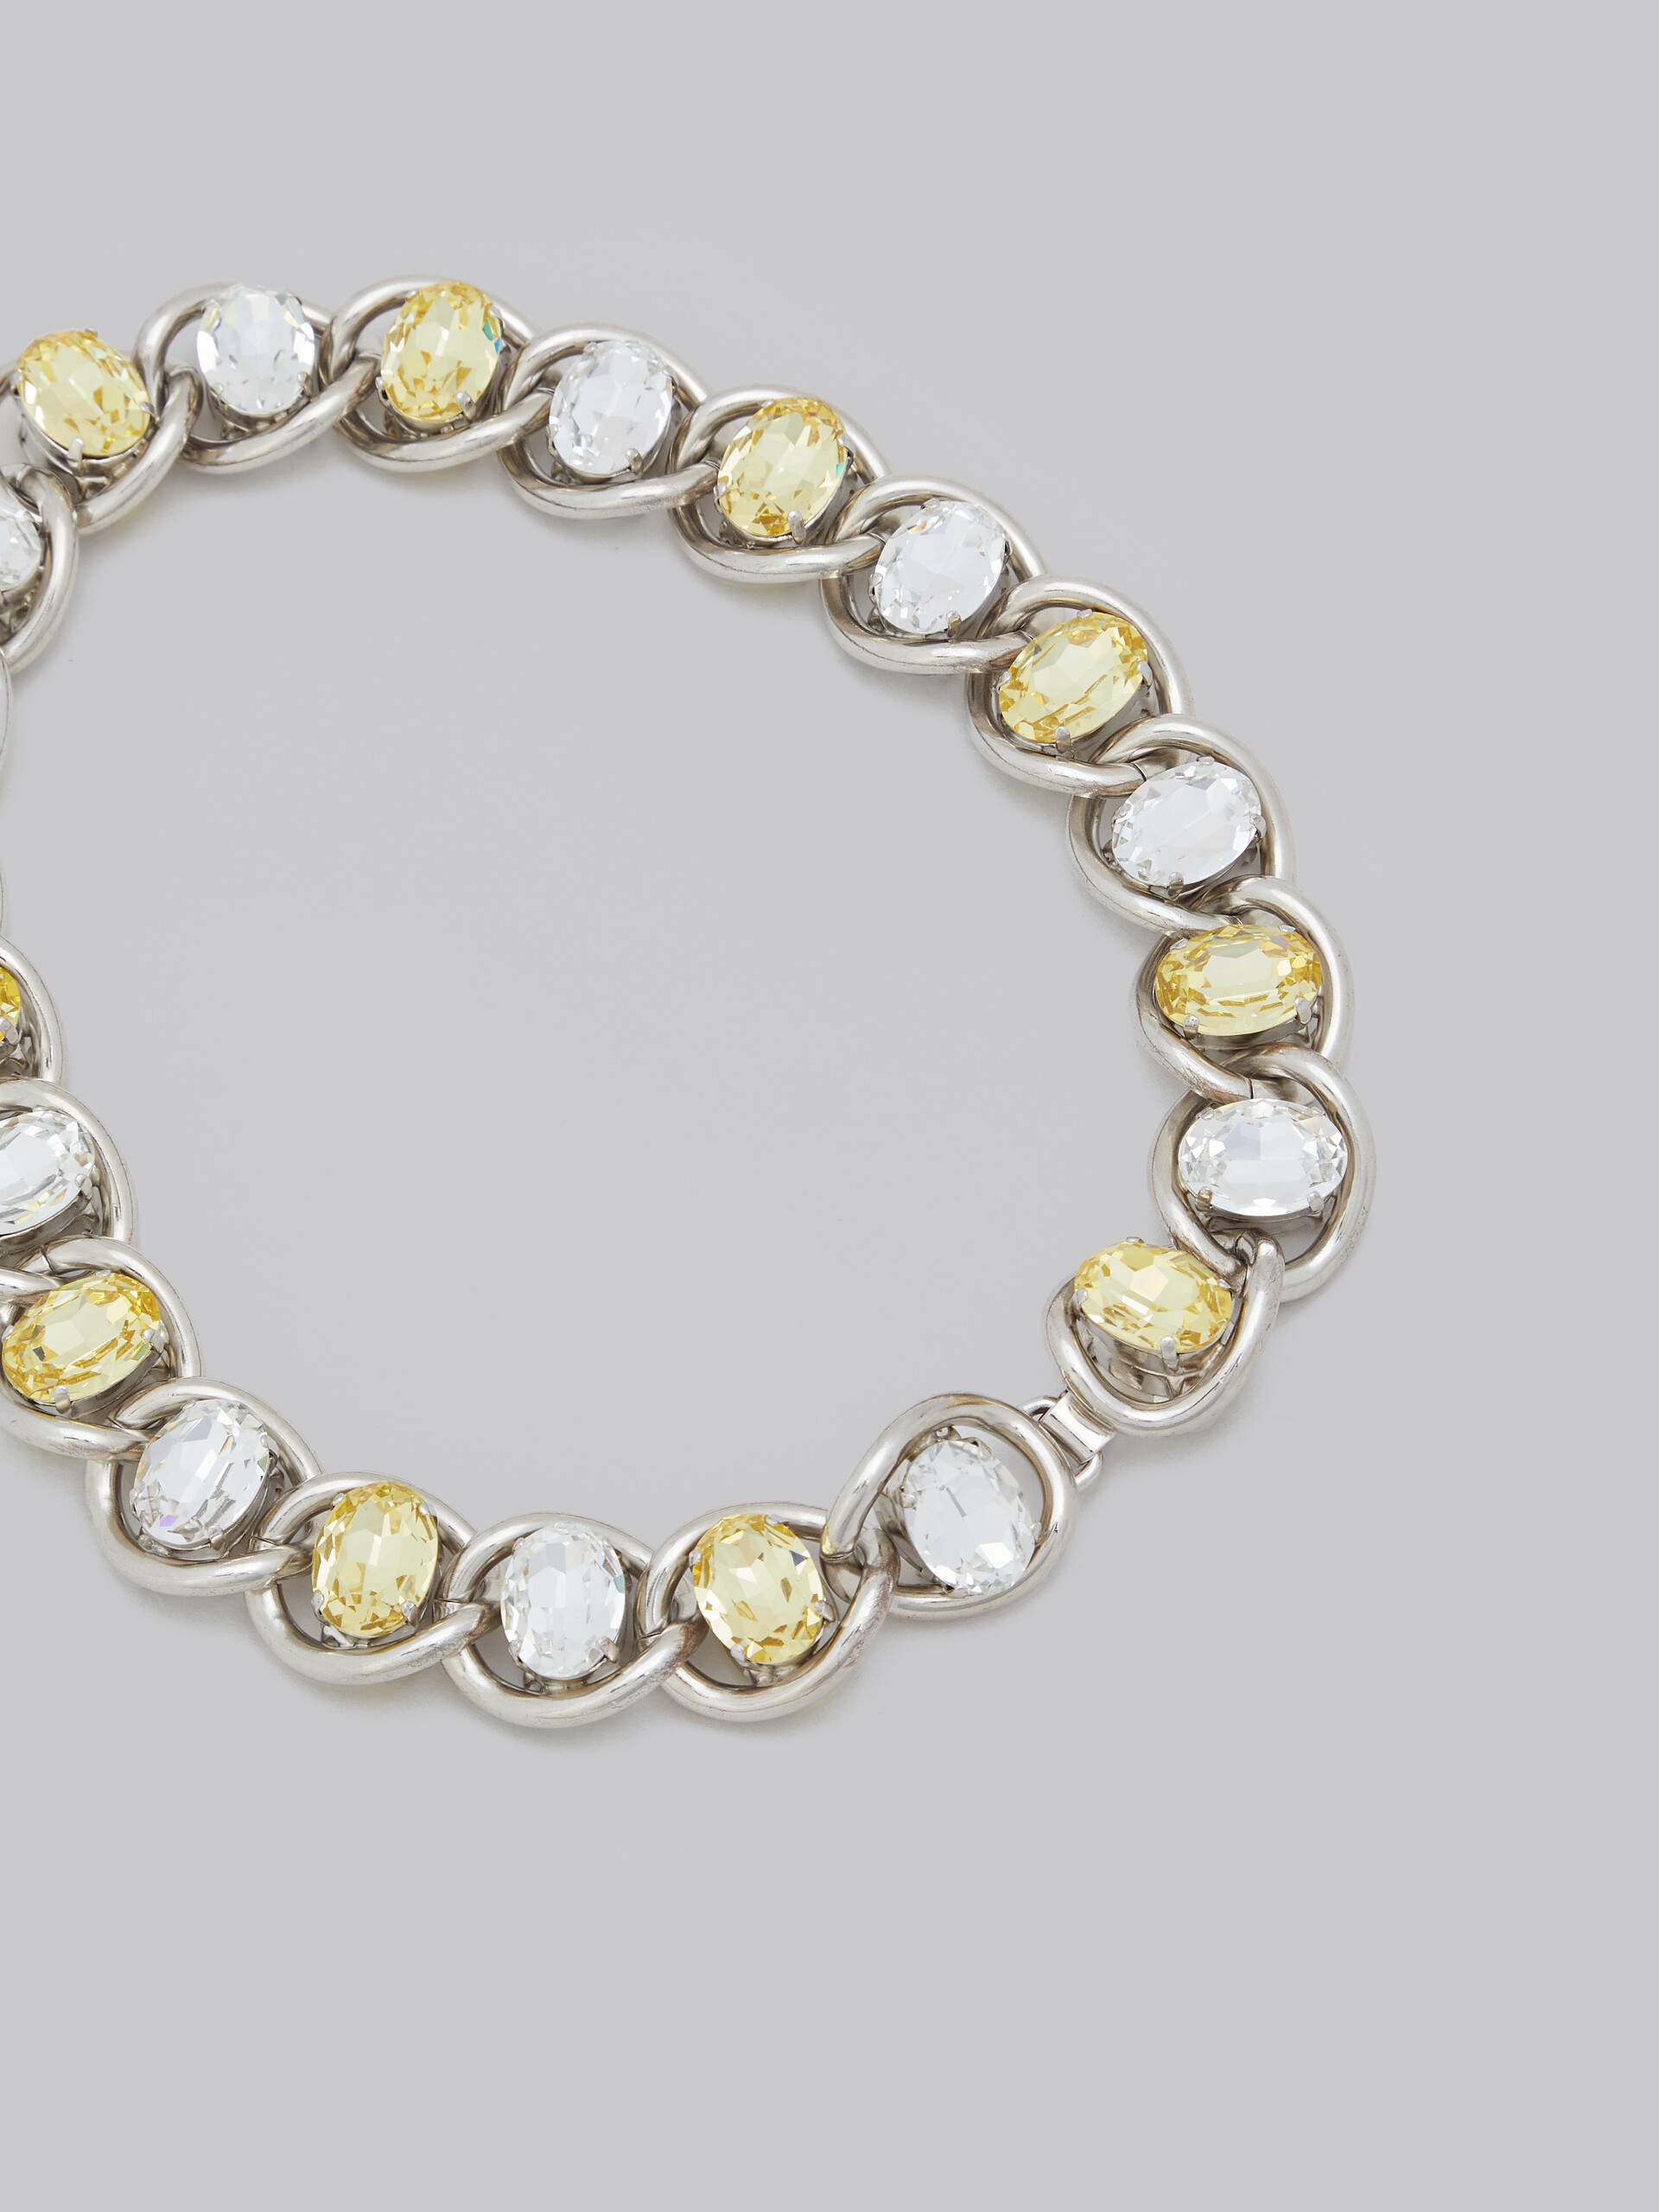 Clear and yellow rhinestone chunky chain necklace - Necklaces - Image 4